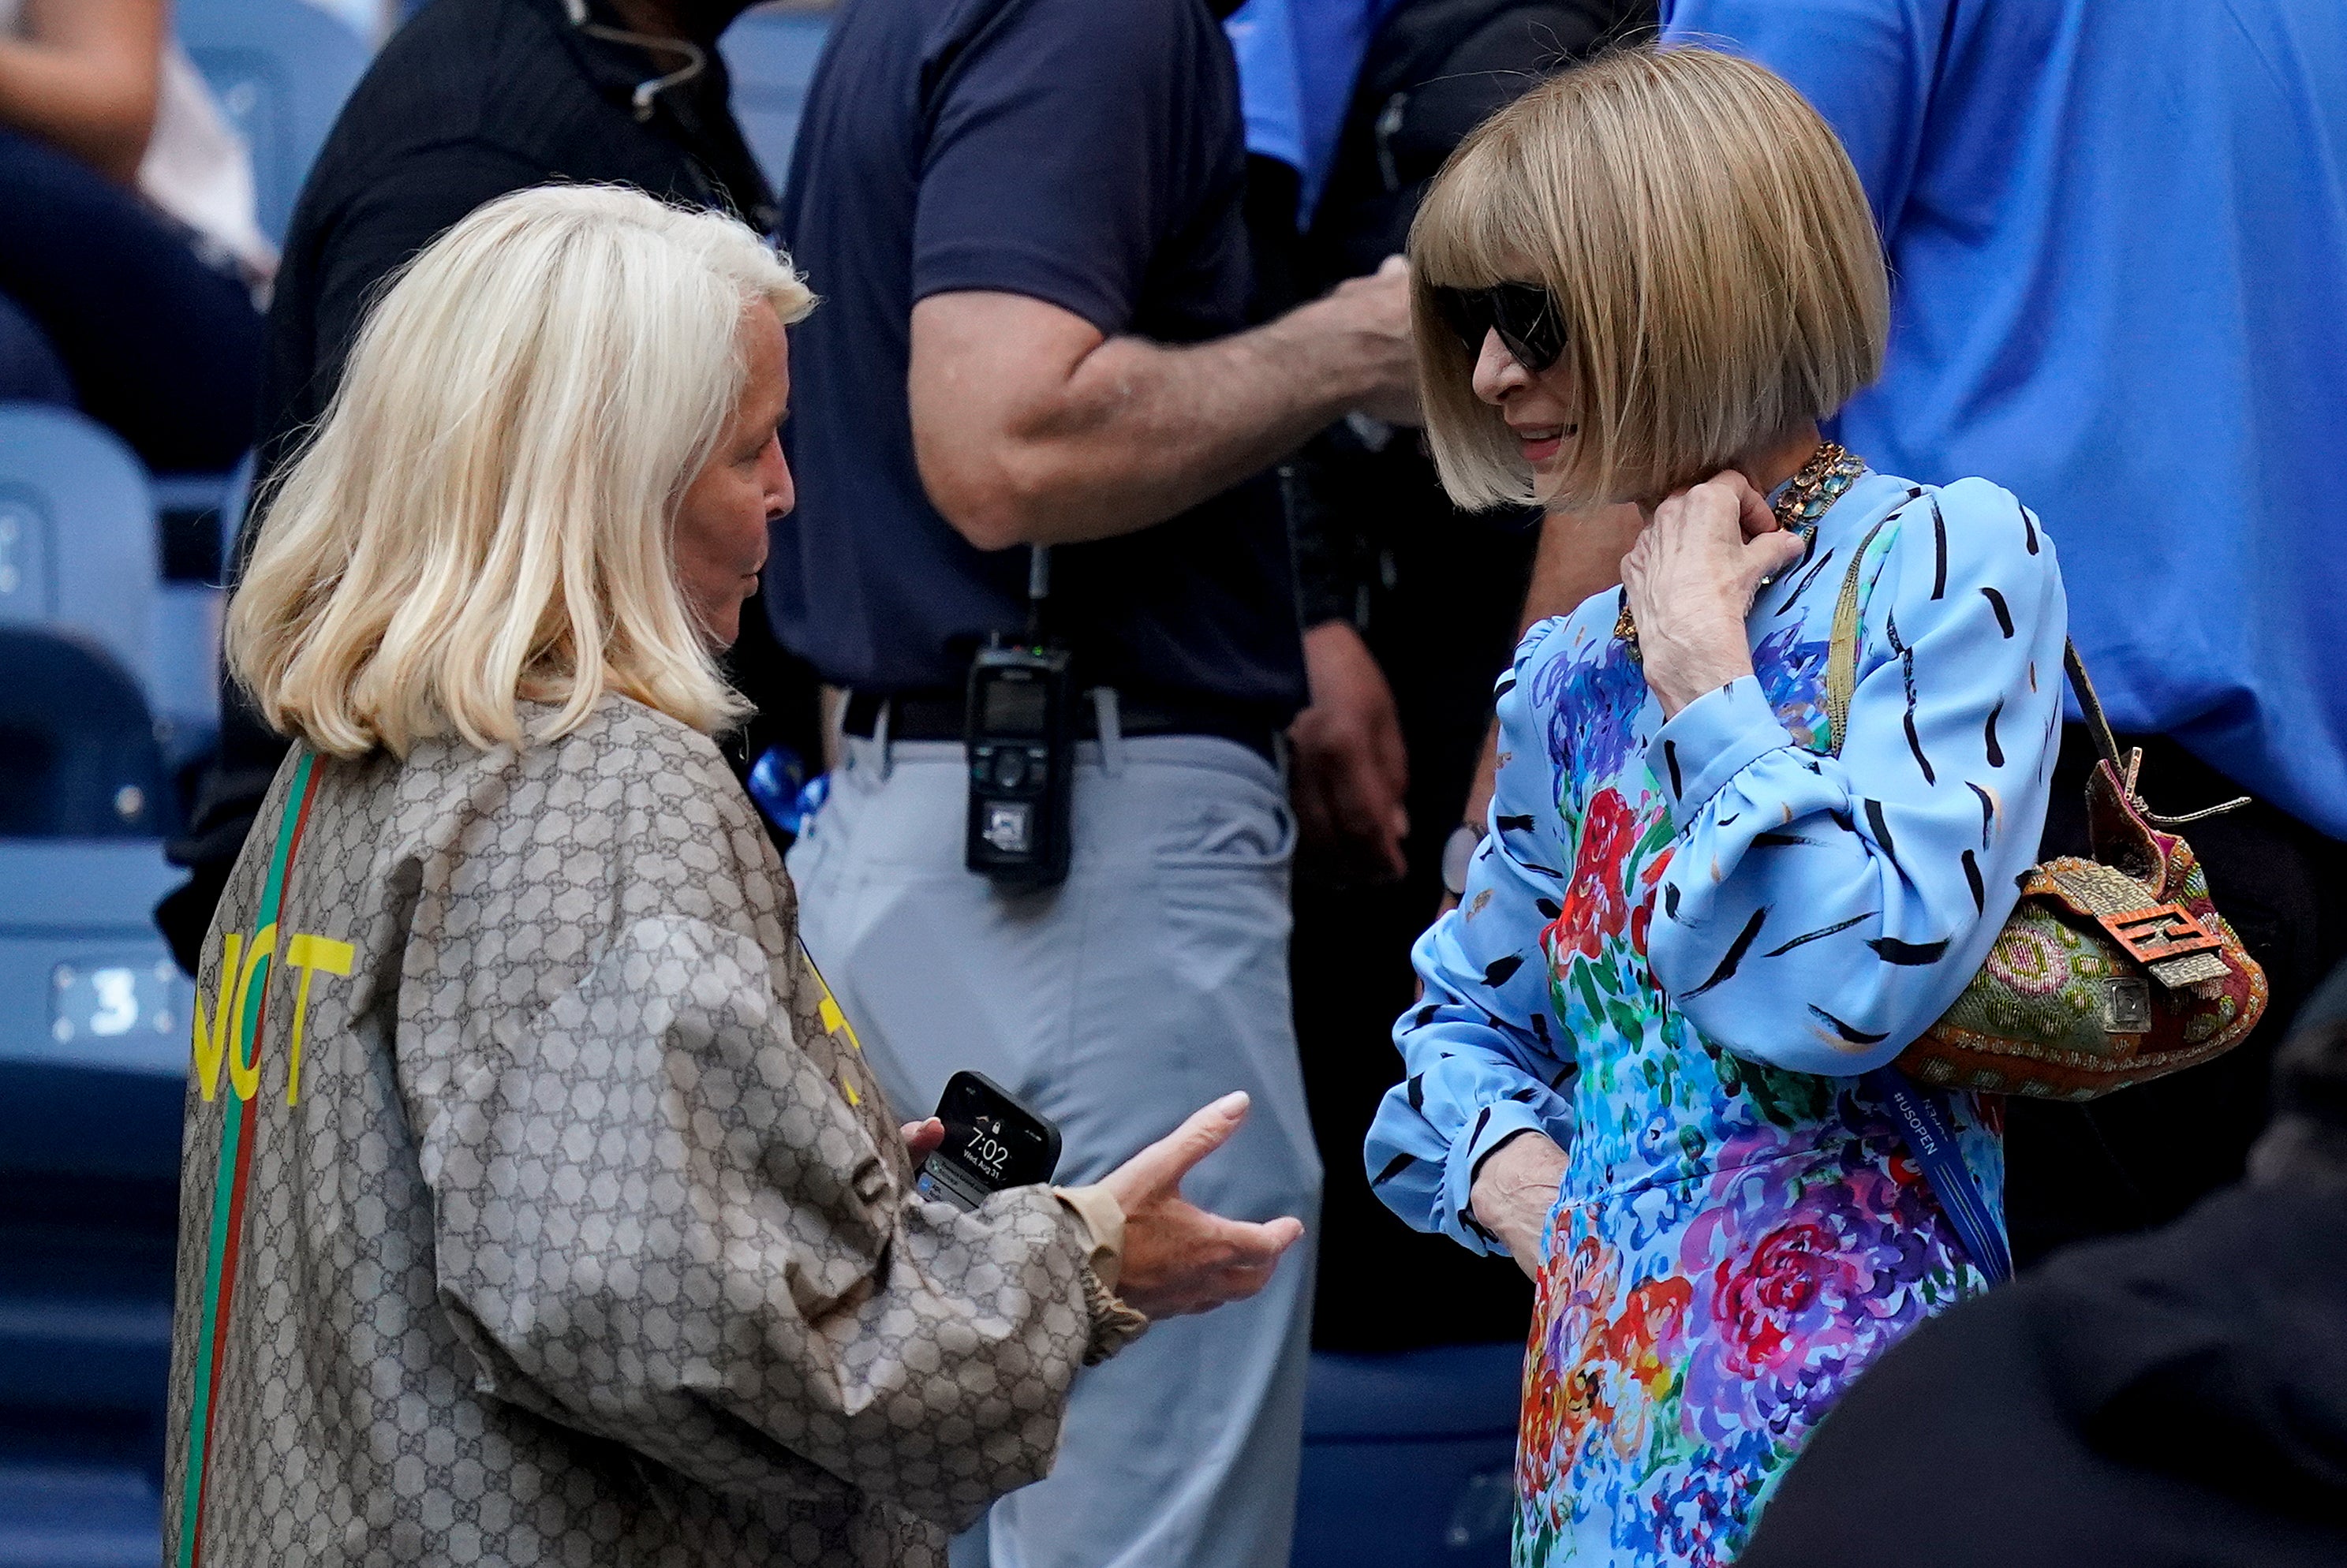 Anna Wintour was among the famous faces pictured at the US Open to watch Williams play (Seth Wenig/AP)